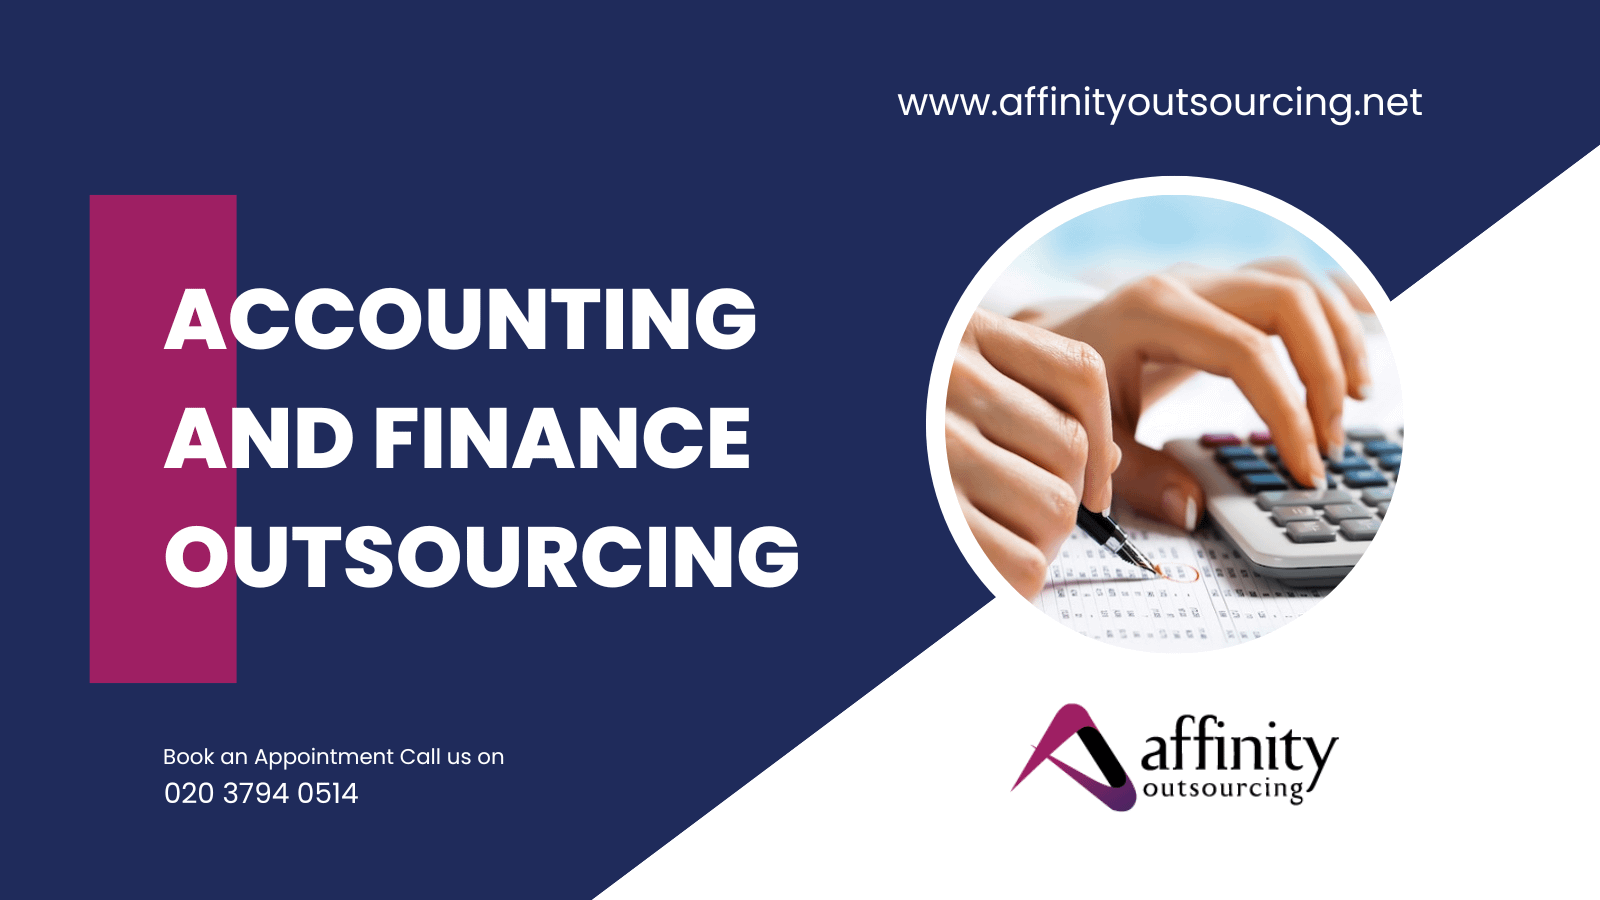 Accounting and Finance Outsourcing